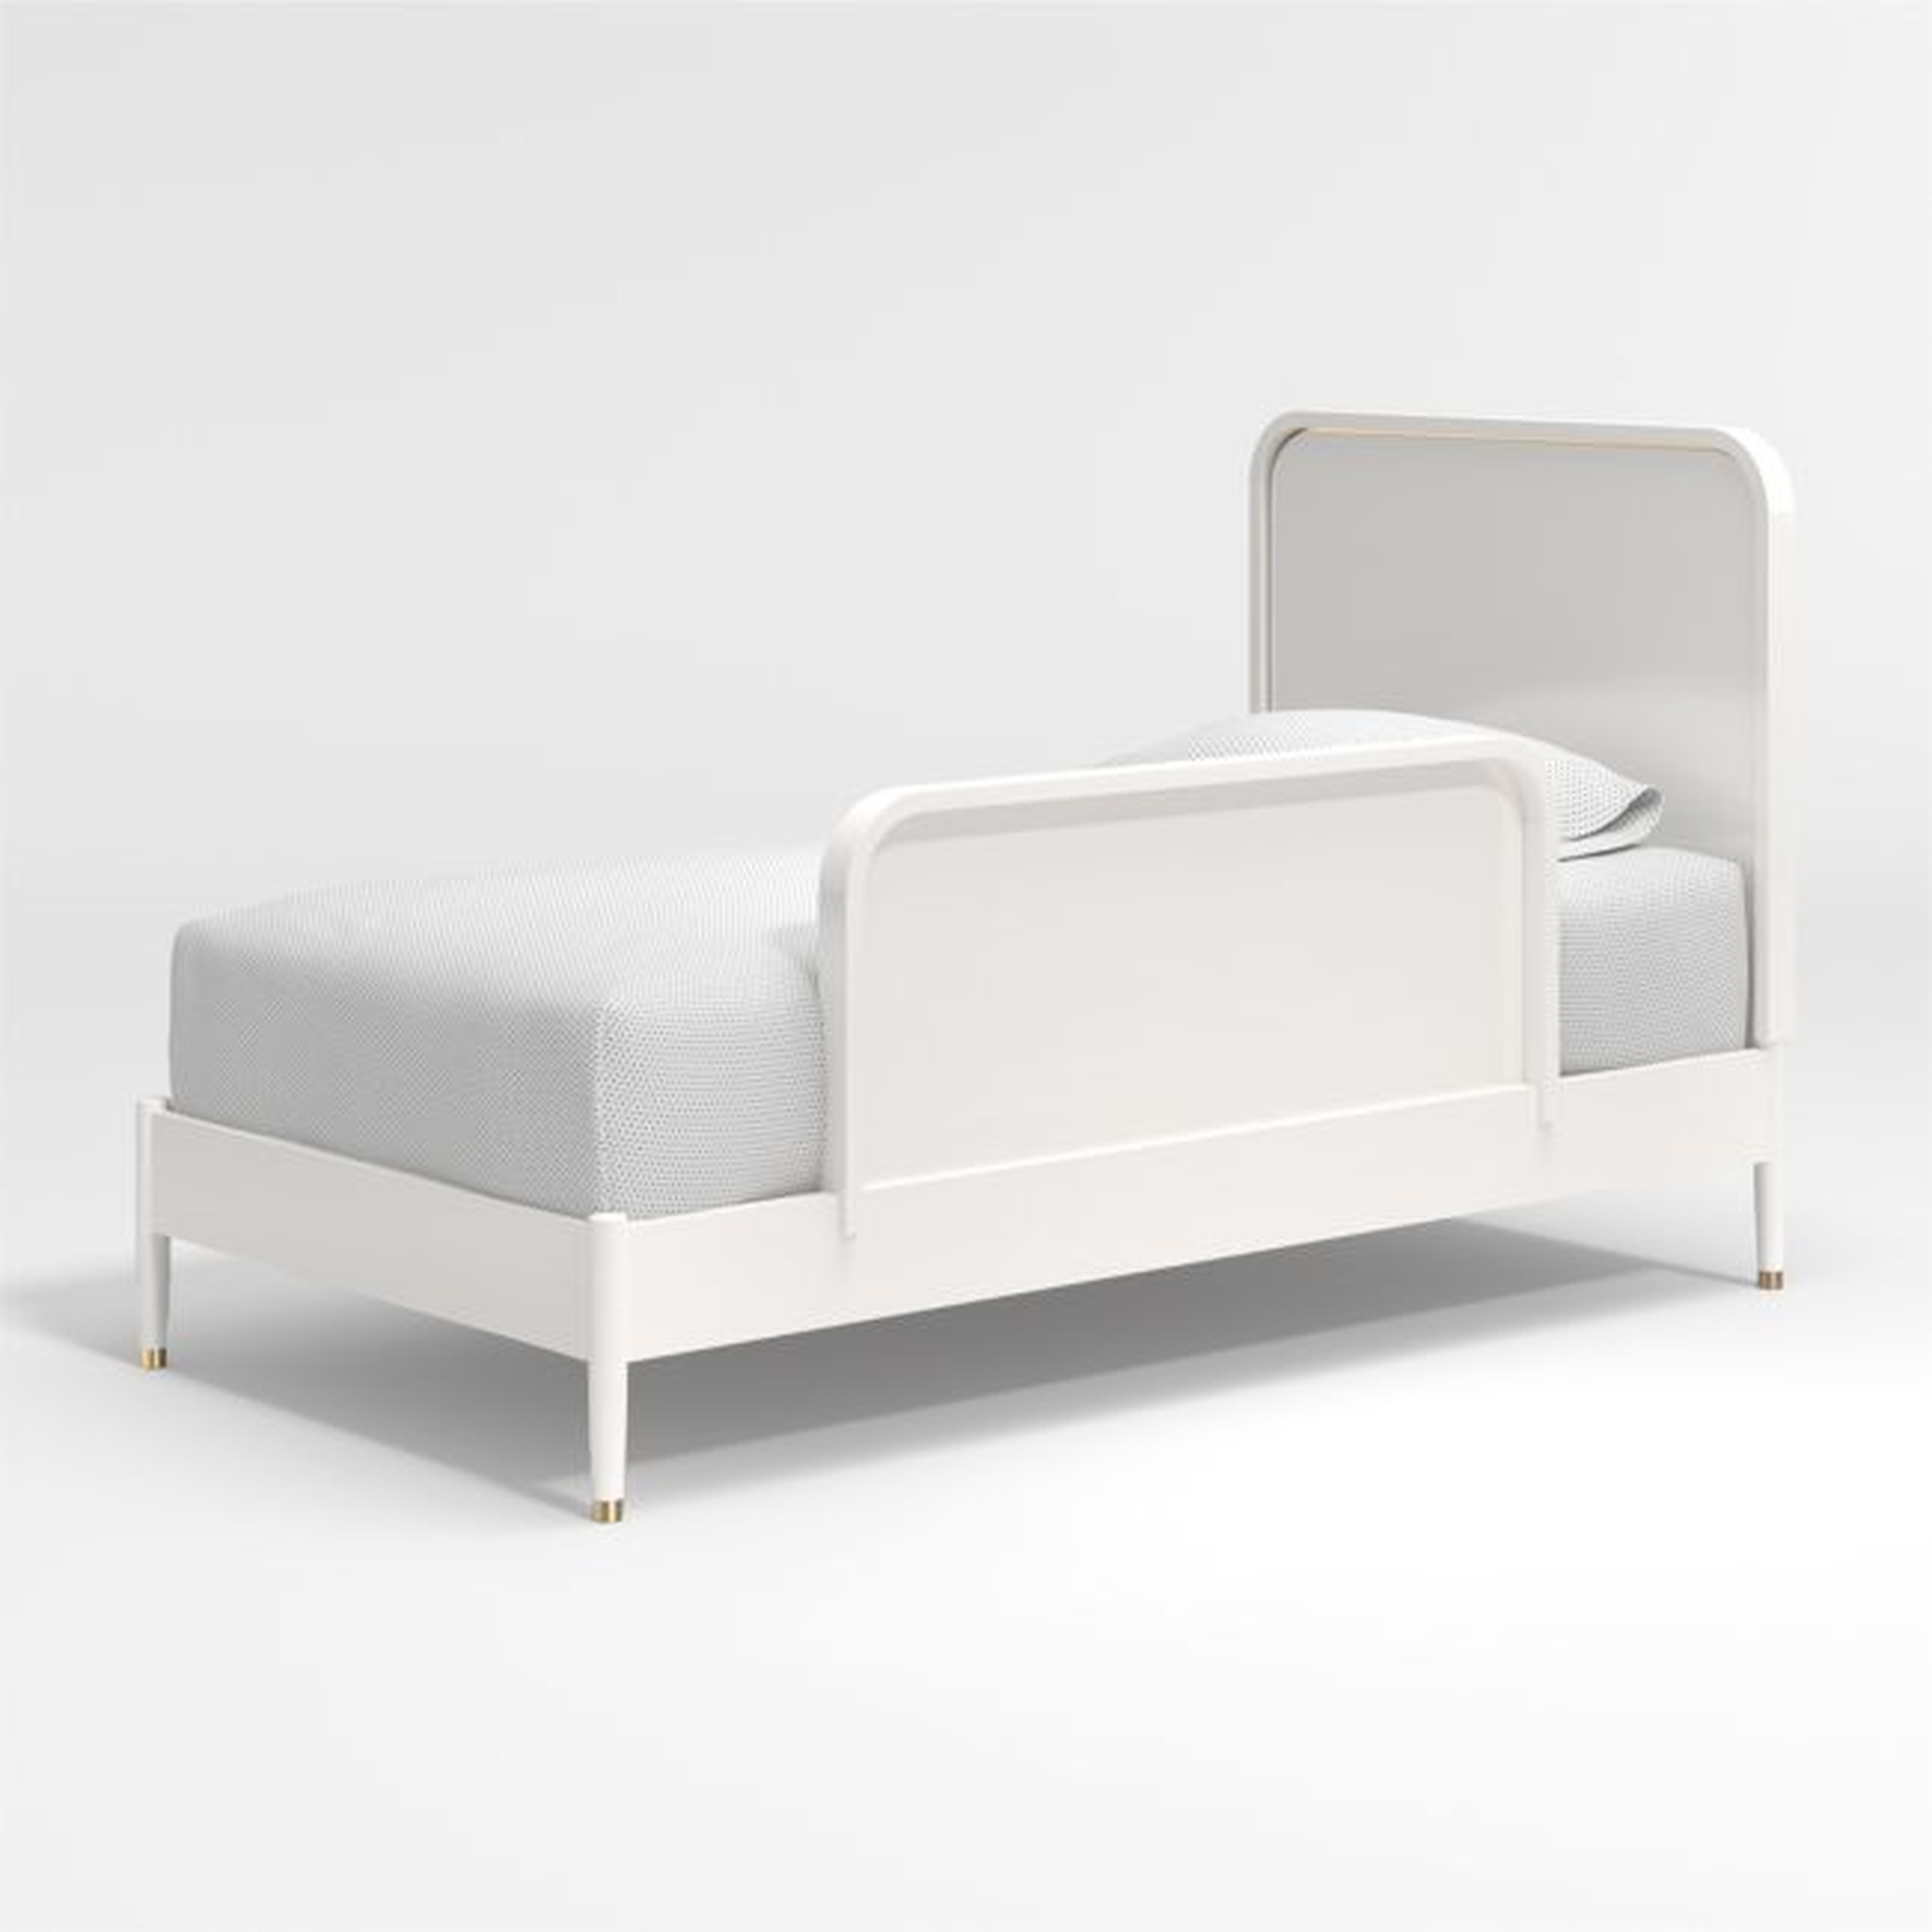 Arlo White Wood Toddler Bed Rail - Crate and Barrel